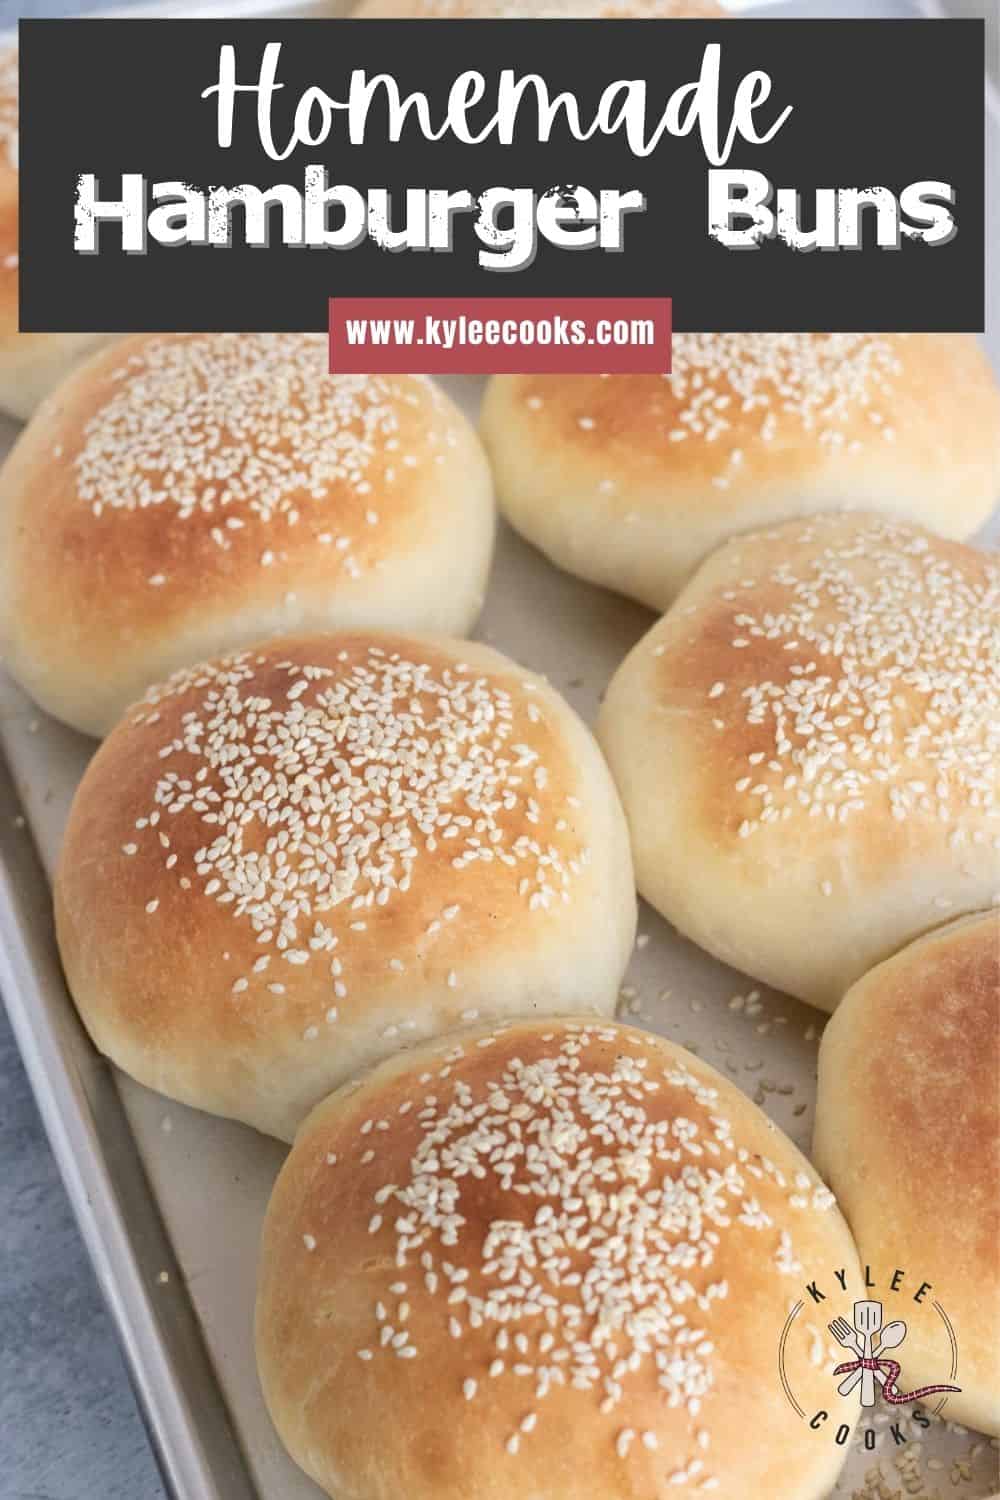 hamburger buns with the recipe title in text overlaid